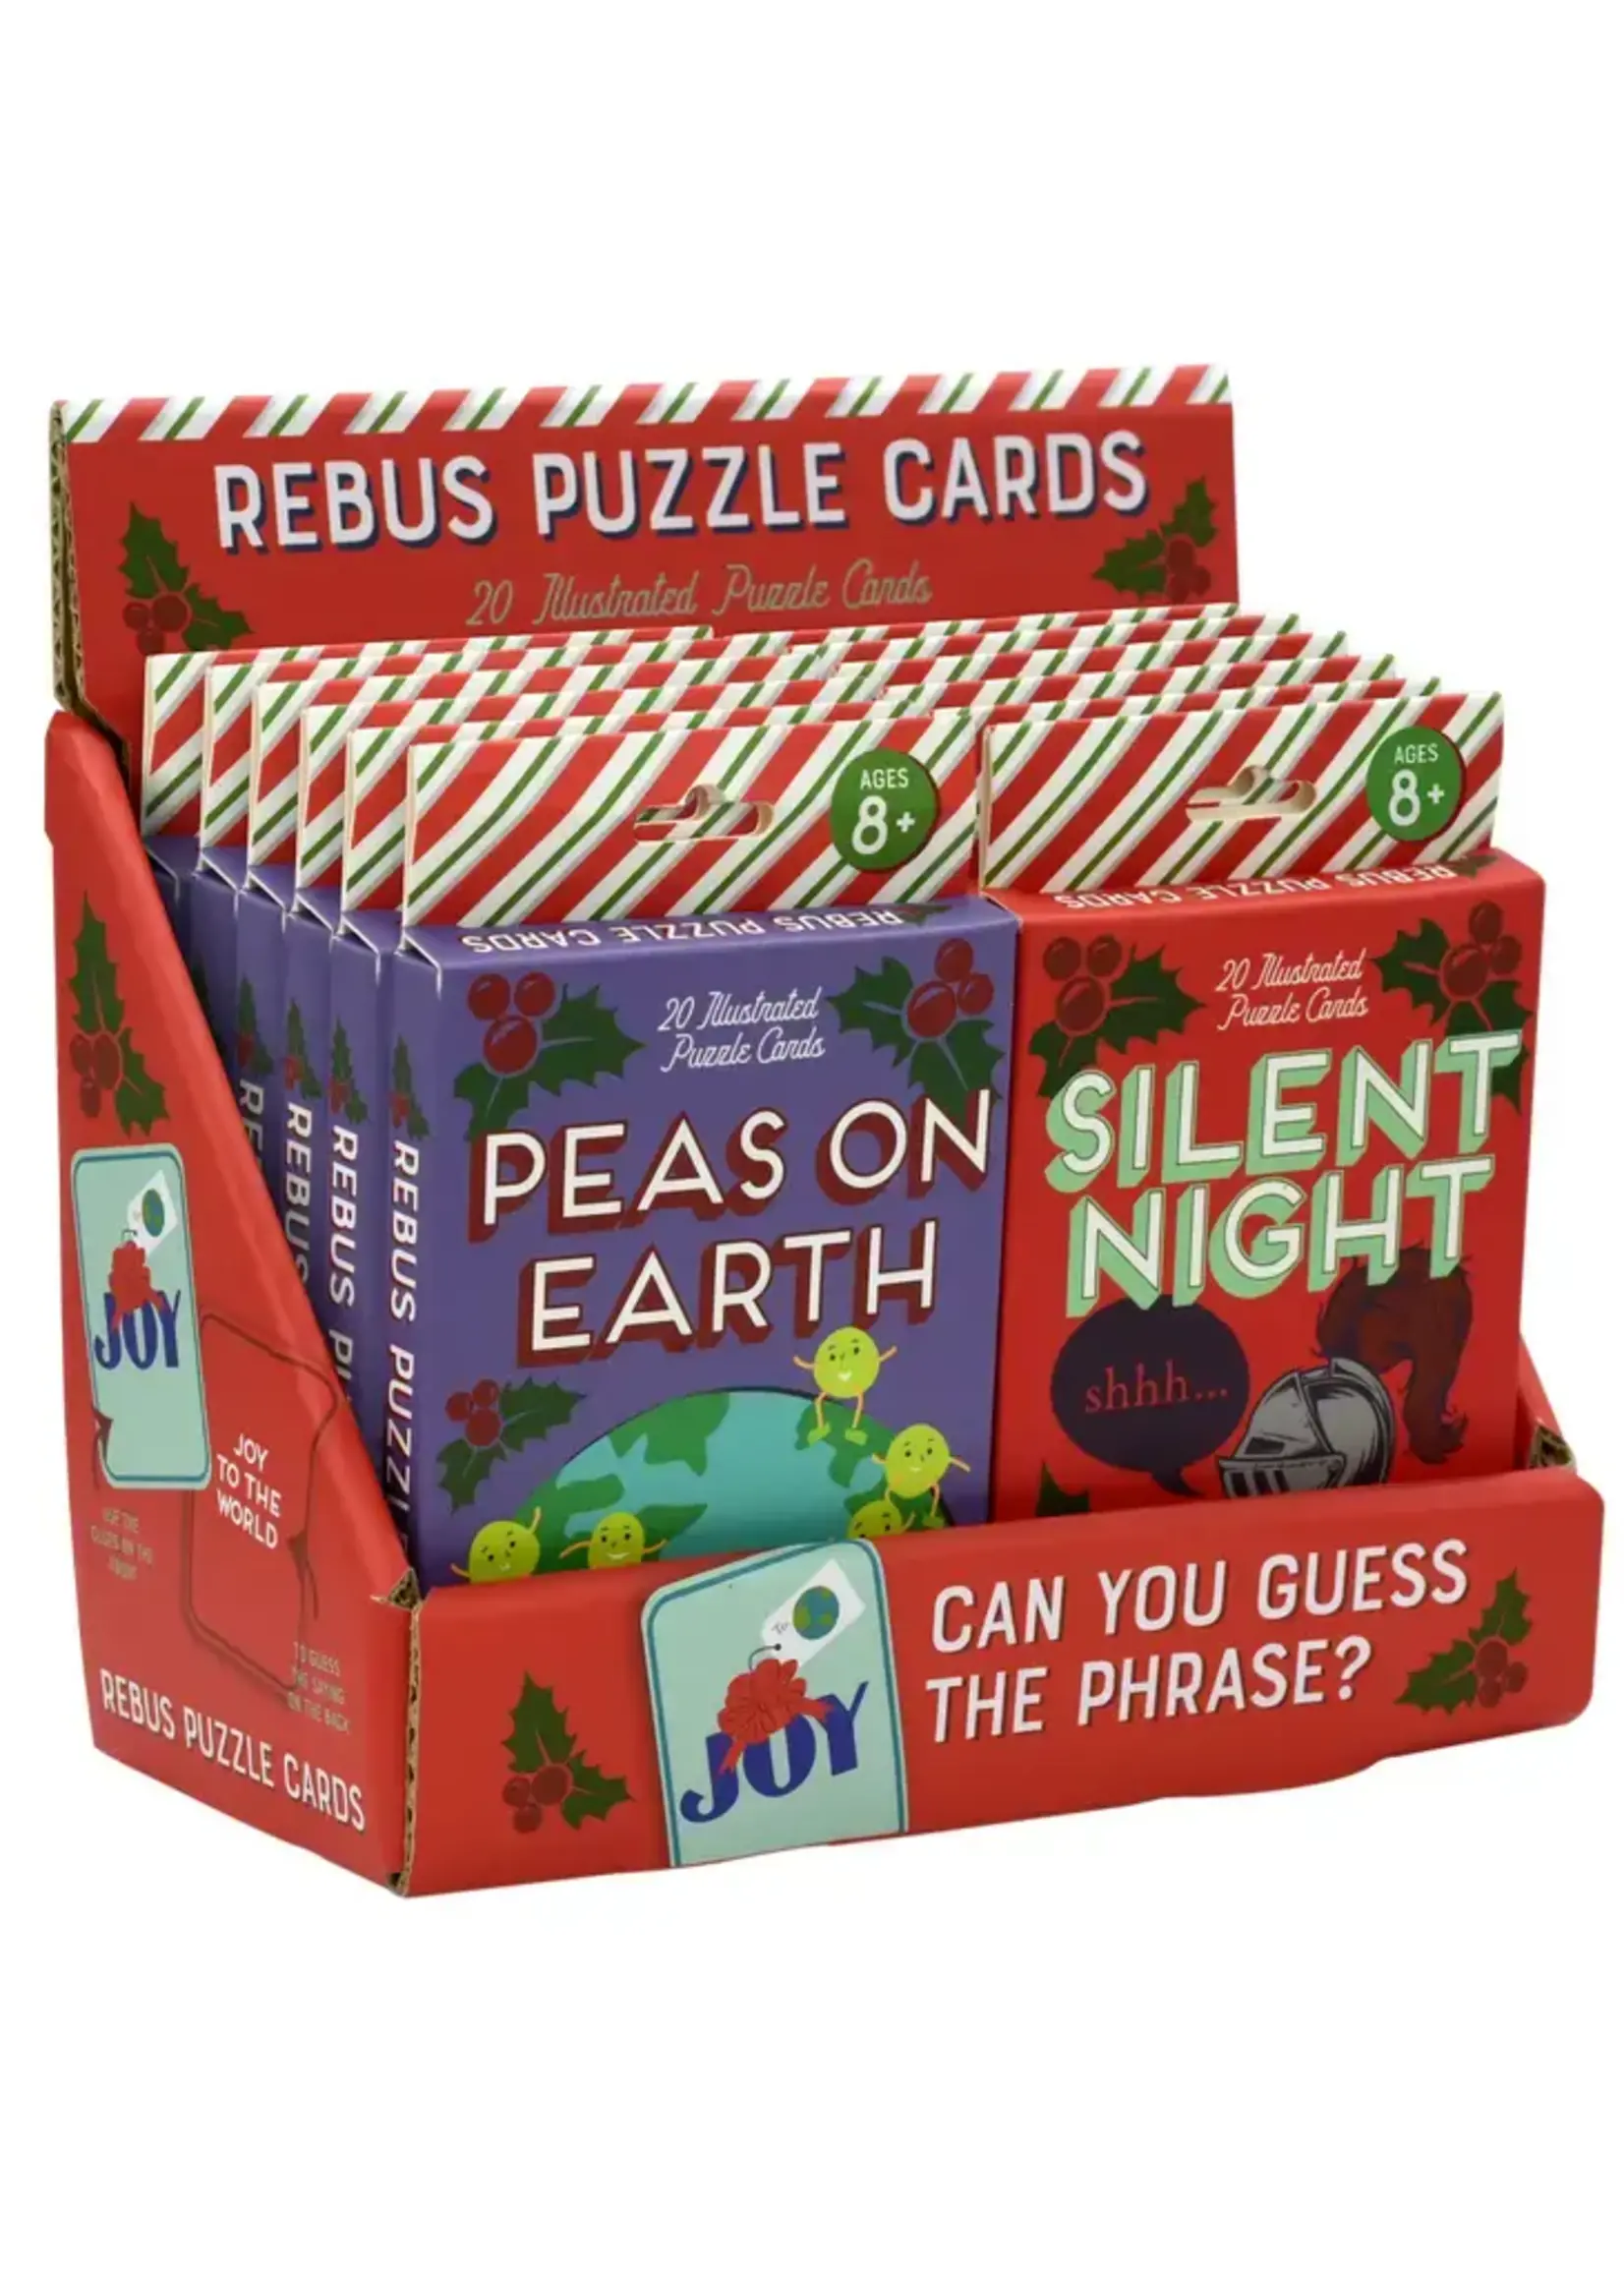 Project Genius Christmas Puzzle Cards